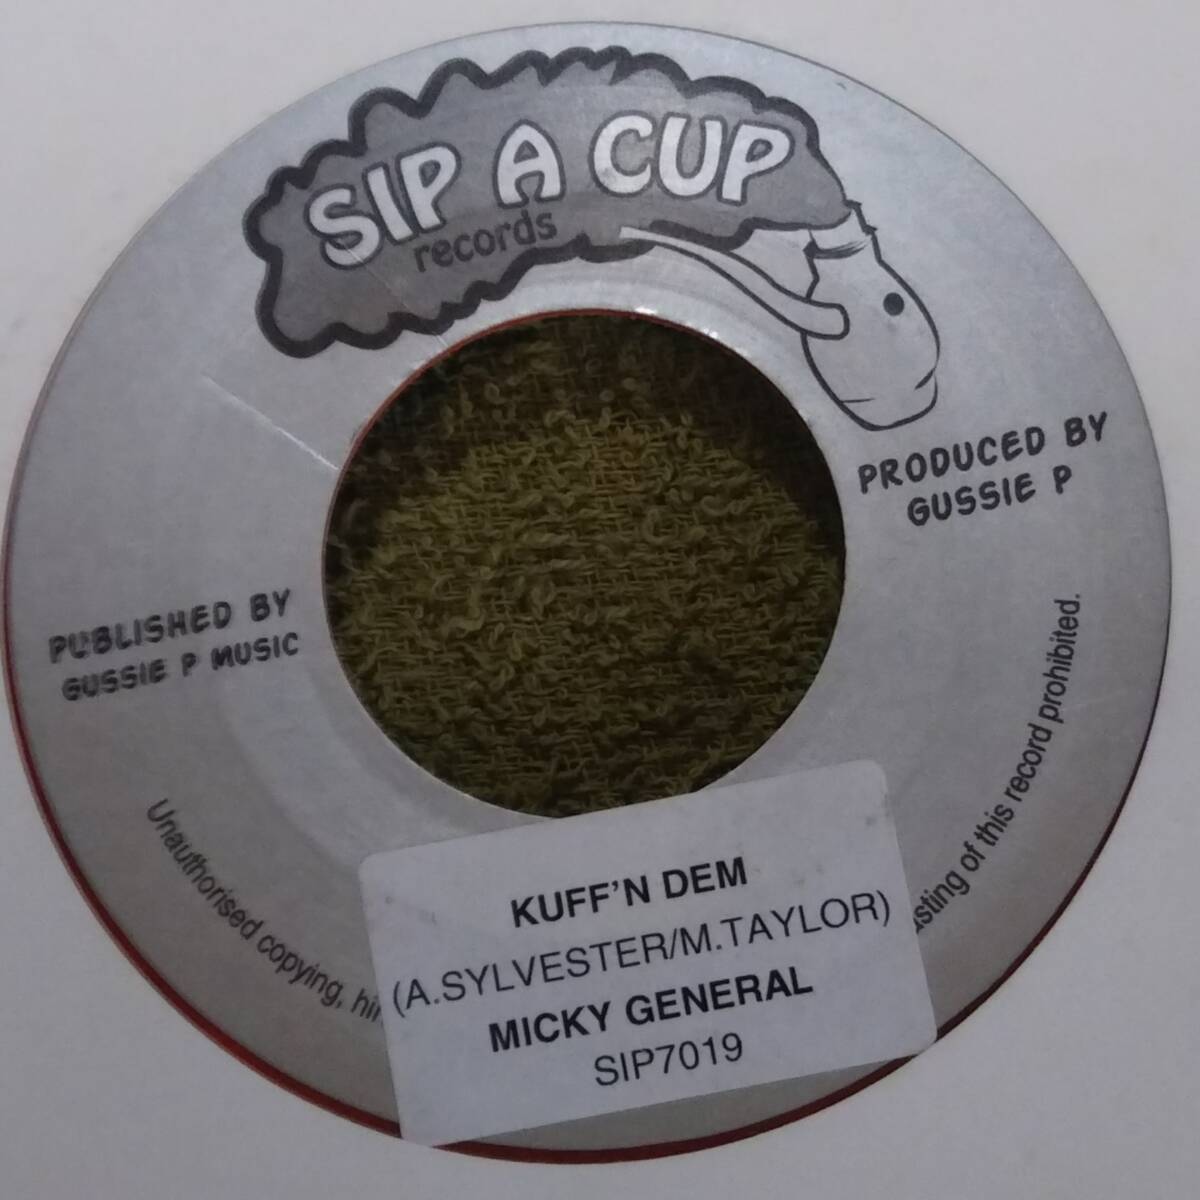 Gussie P Produced Kuff’n Dem Micky General from Sip A Cup の画像1